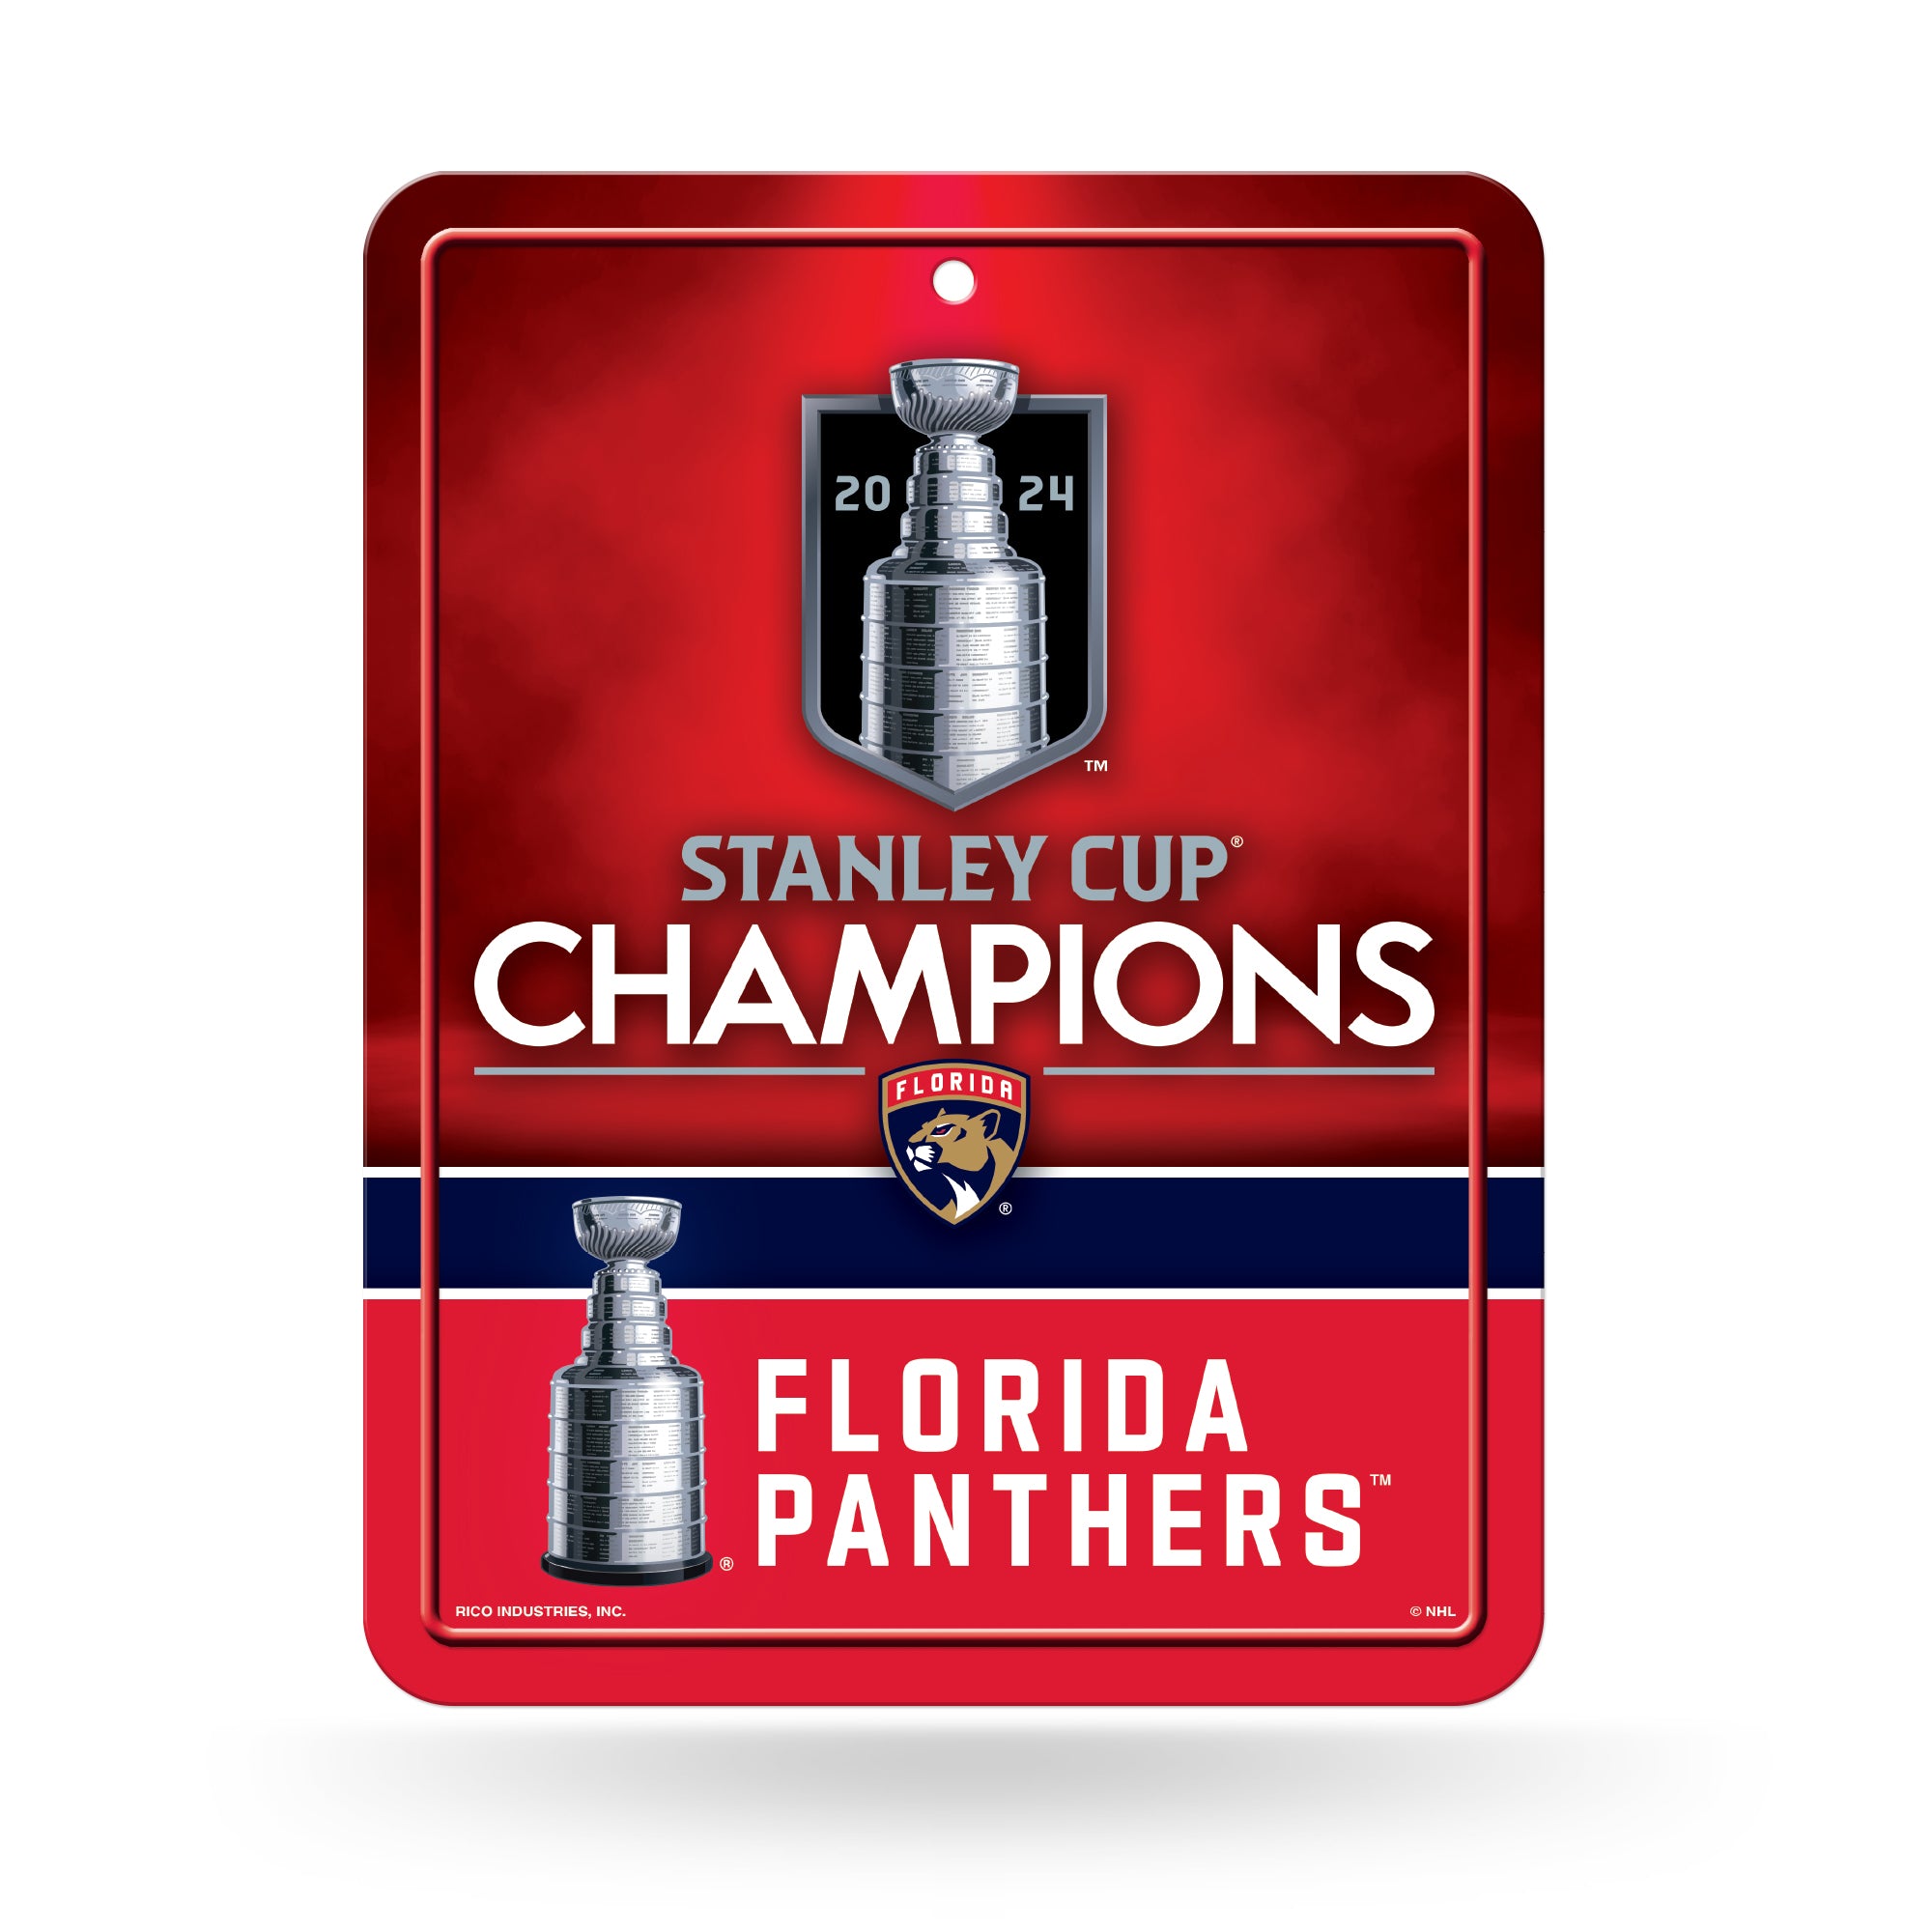 Florida Panthers 2024 Stanley Cup Champions Metal Parking Sign - 11 x 17